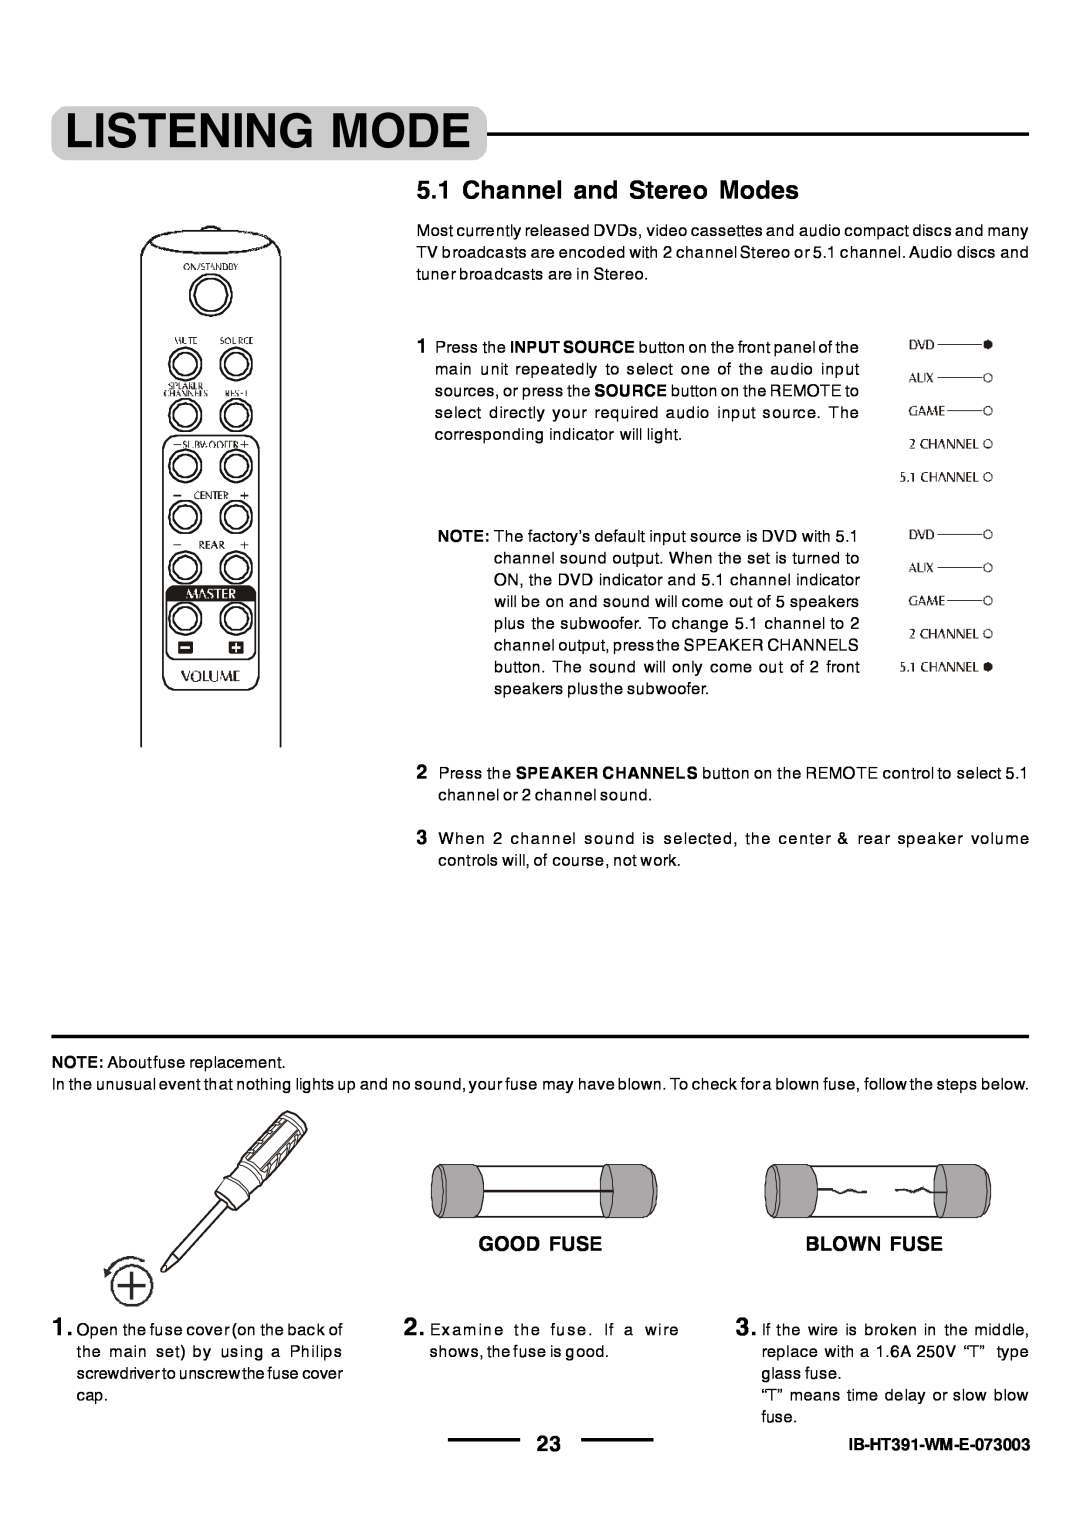 Lenoxx Electronics HT-391 manual Listening Mode, Channel and Stereo Modes, Good Fuse, Blown Fuse, IB-HT391-WM-E-073003 